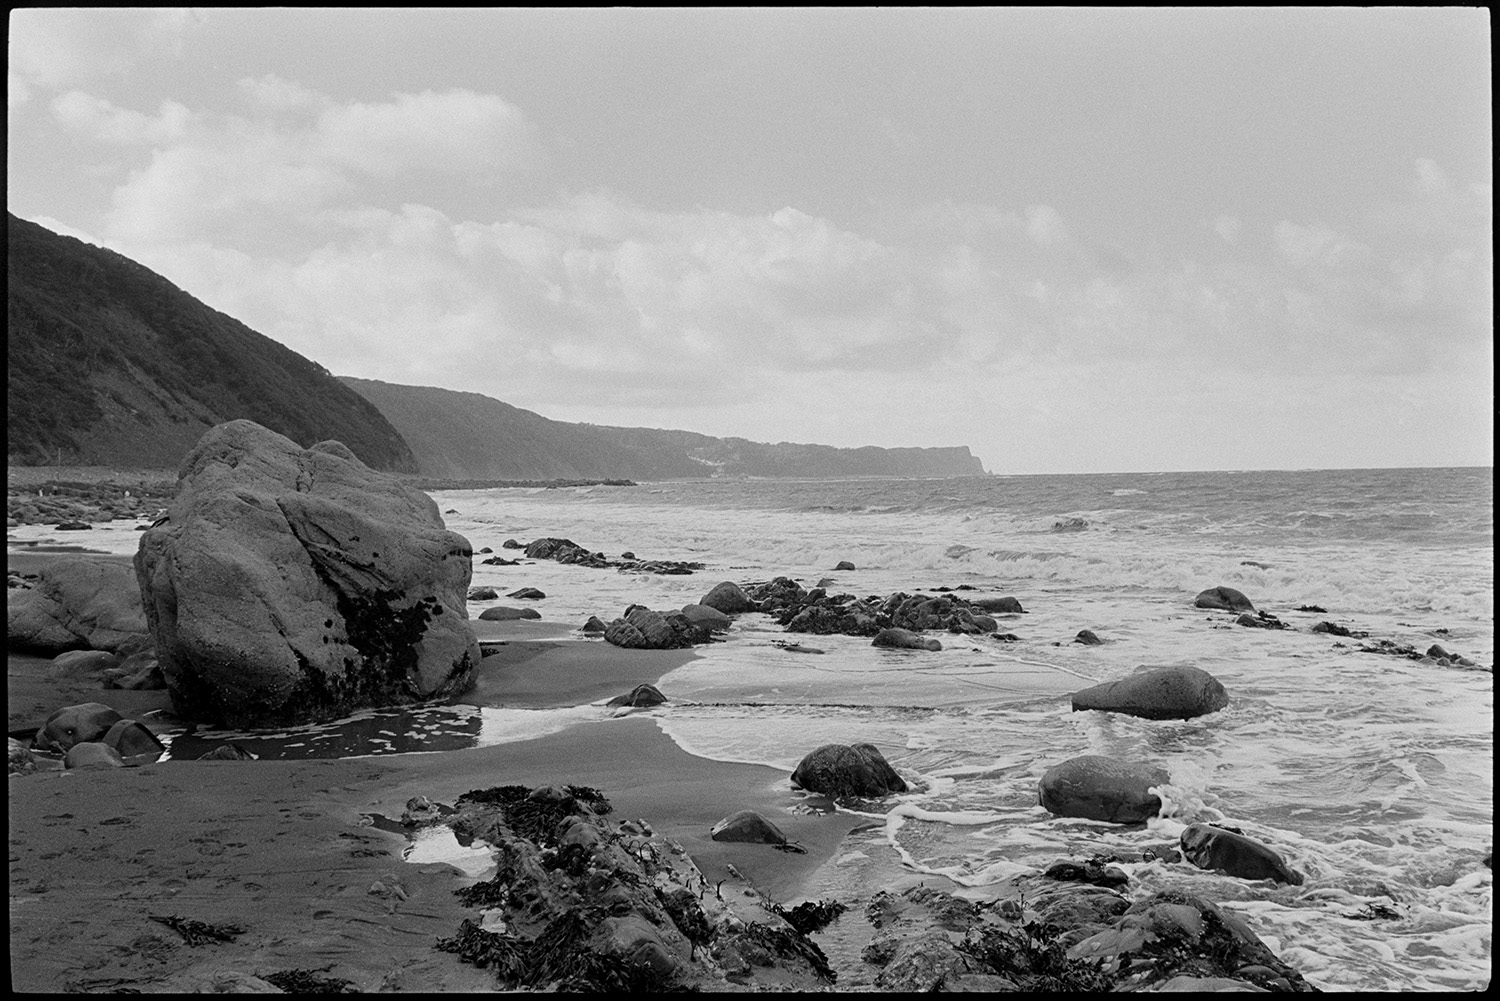 Seaside, beach with shells on rocks, limpets. 
[Rocks on the seashore and beach at Bucks Mills. Small waves are crashing over the rocks and cliffs can be seen in the background.]